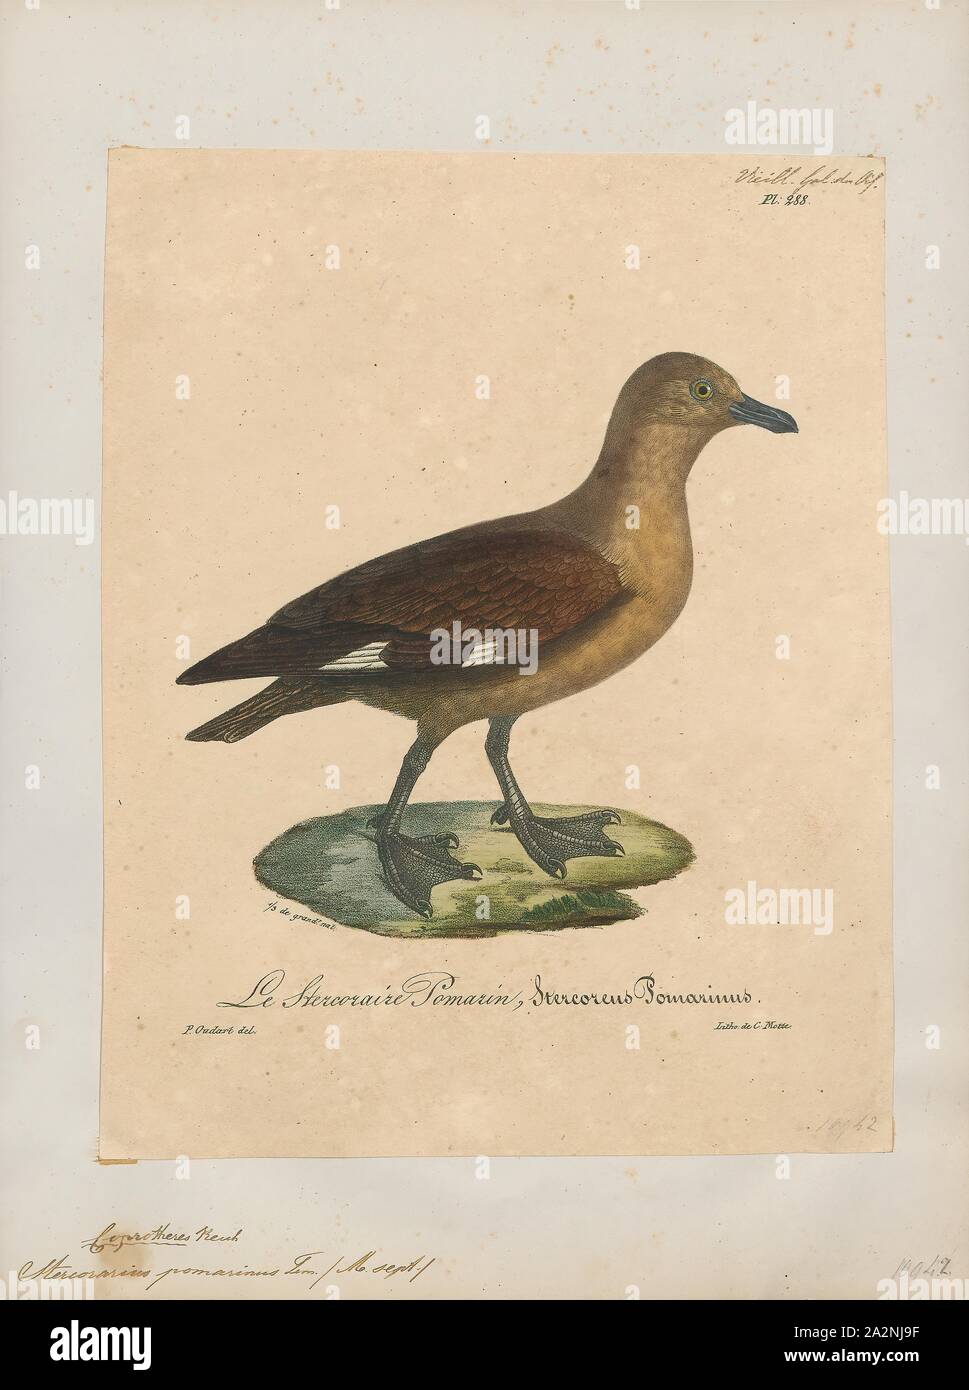 Stercorarius pomarinus, Print, The pomarine jaeger (Stercorarius pomarinus), pomarine skua, or pomatorhine skua, is a seabird in the skua family Stercorariidae. It is a migrant, wintering at sea in the tropical oceans., 1825-1834 Stock Photo